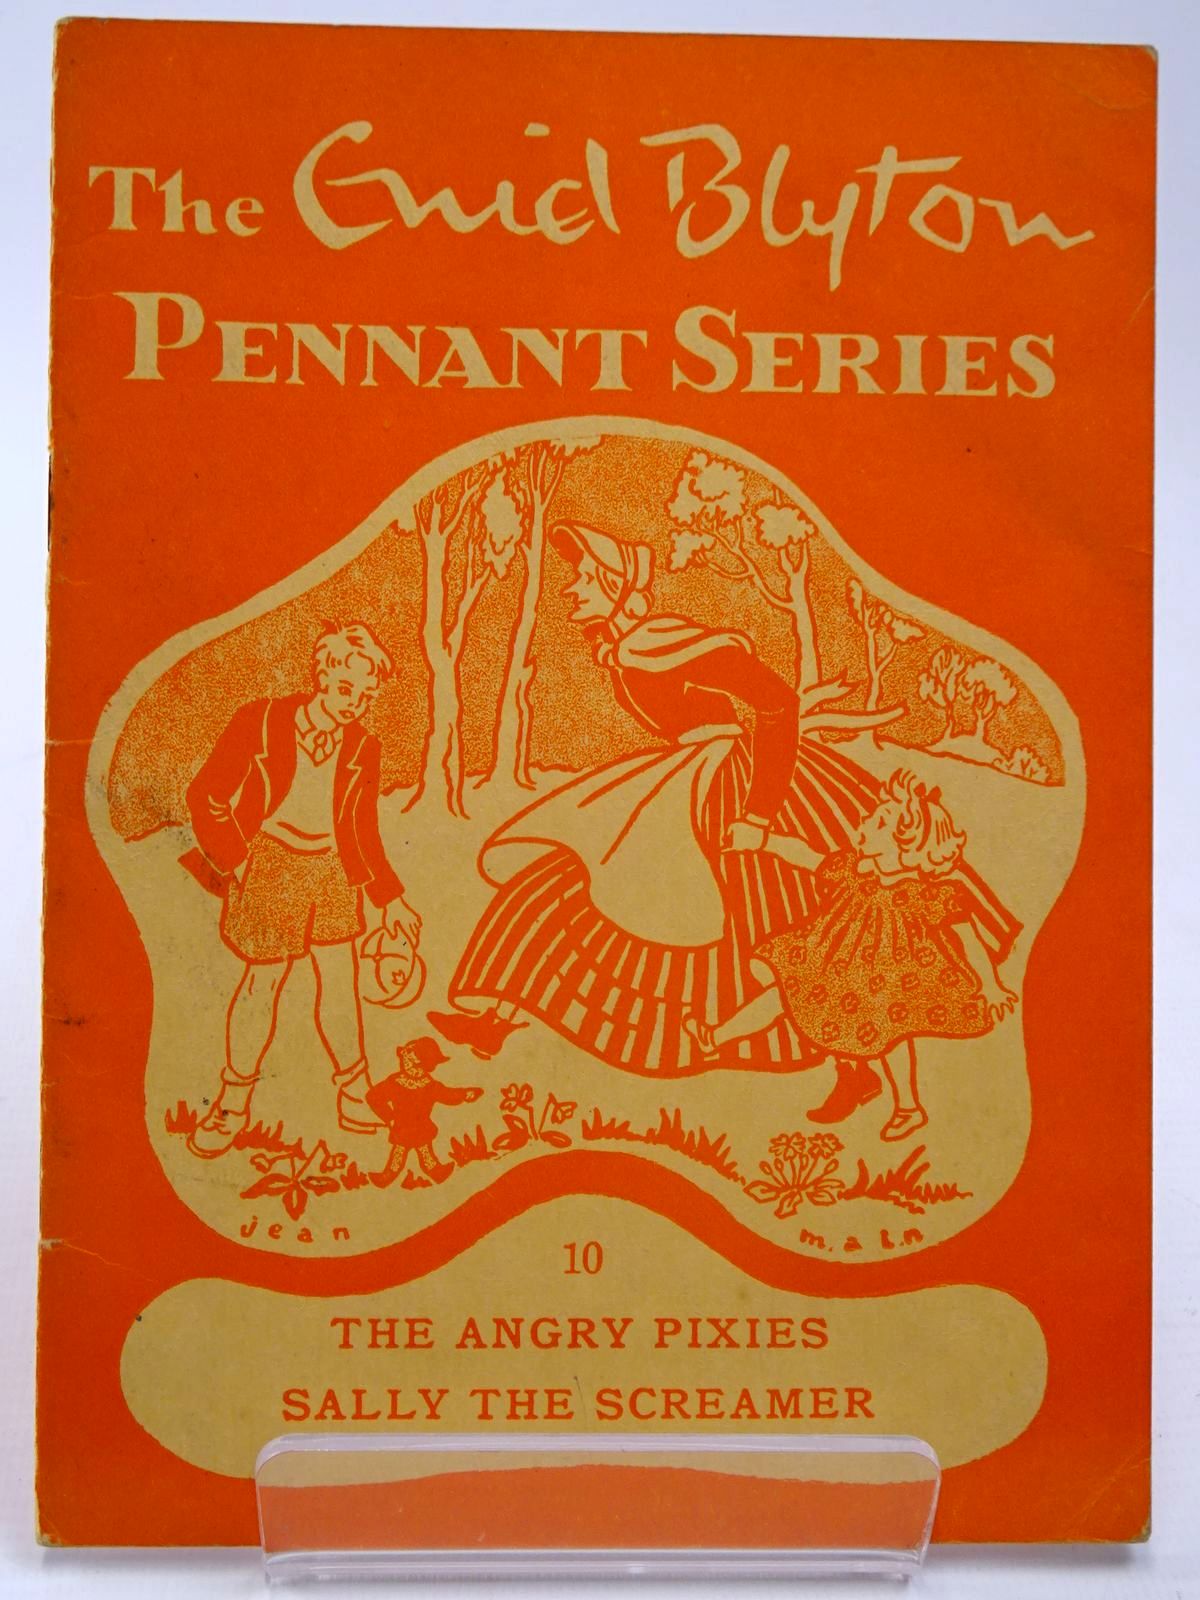 Photo of THE ENID BLYTON PENNANT SERIES No. 10 THE ANGRY PIXIES / SALLY THE SCREAMER written by Blyton, Enid illustrated by Soper, Eileen Main, Jean published by Macmillan &amp; Co. Ltd. (STOCK CODE: 2130522)  for sale by Stella & Rose's Books